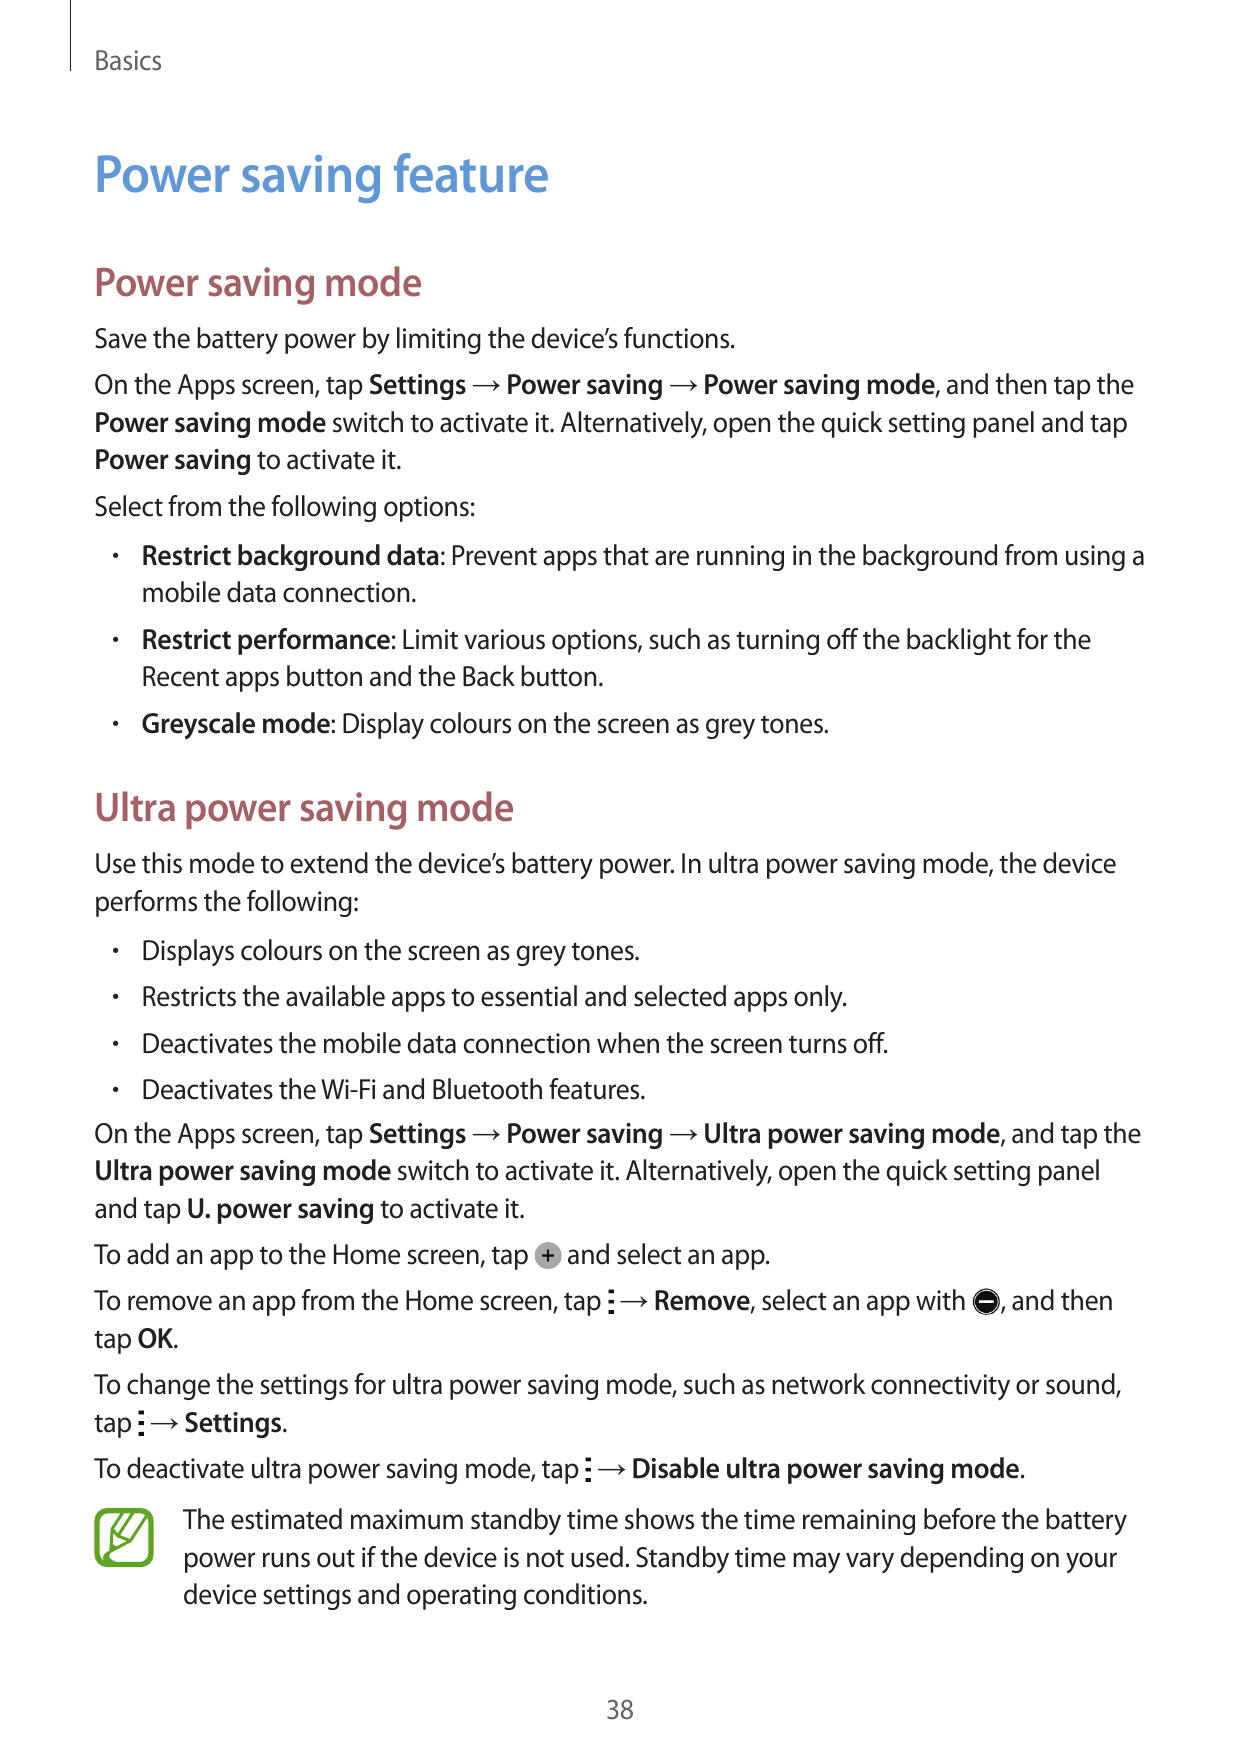 BasicsPower saving featurePower saving modeSave the battery power by limiting the device’s functions.On the Apps screen, tap Set